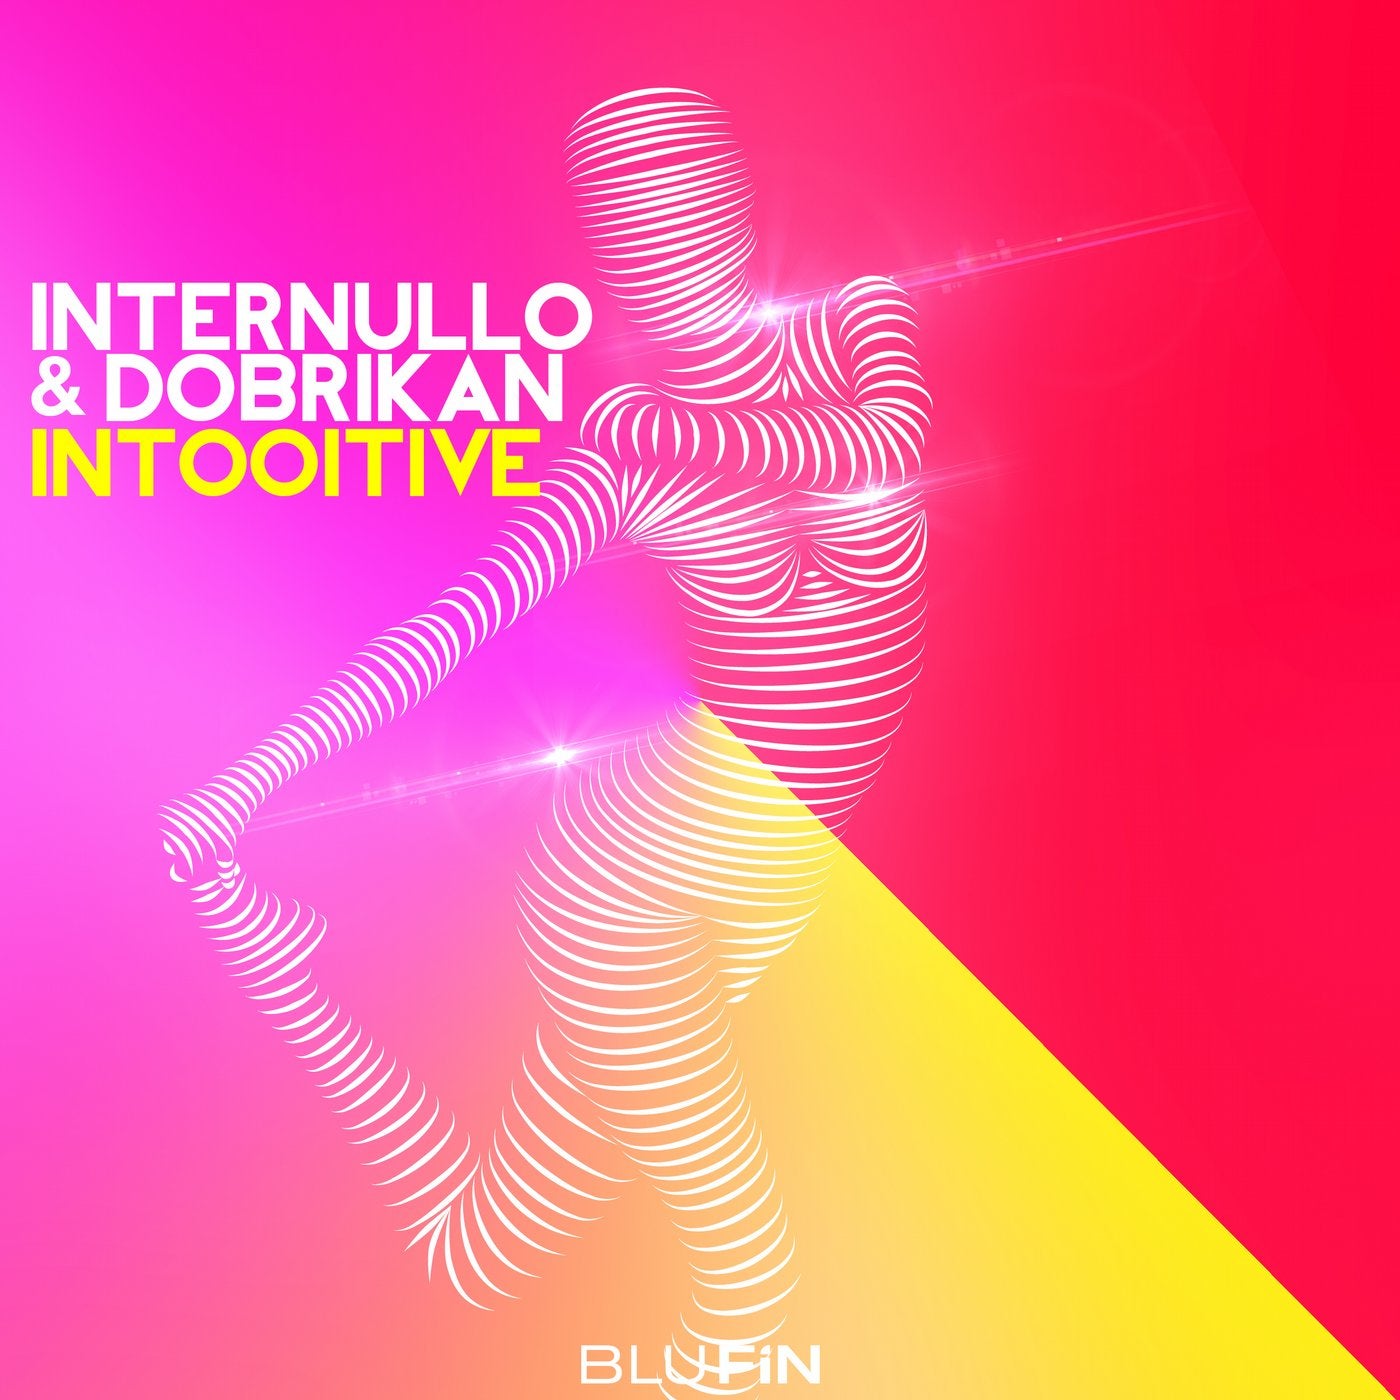 Intooitive